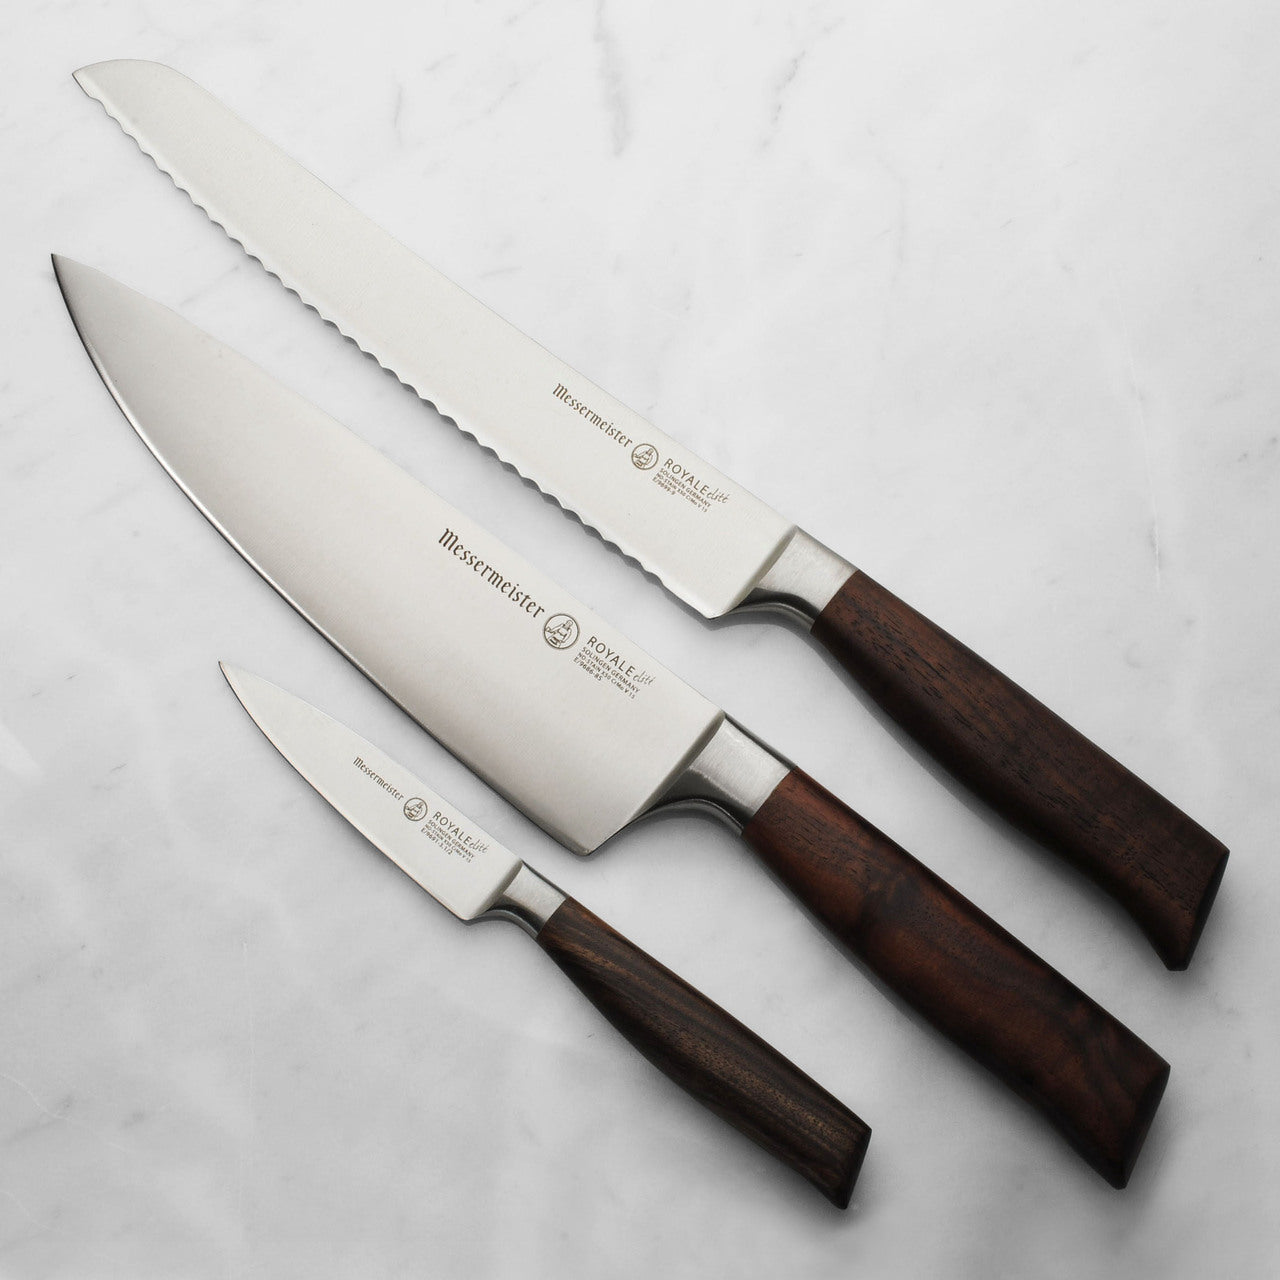 BEON.COM.AU E9000 3T         Royal Elite 3 Piece Trio Set The Messermeister Royale Elité 3 Piece Trio Set consists of an 8 Inch Stealth Chef's Knife (E9686 8S), 9 Inch Bread Knife (E9699 9), and 3.5 Inch Spear Point Paring Knife (E9691 3). These three are the most utilized knives in the kitchen. Features... Messermeister at BEON.COM.AU